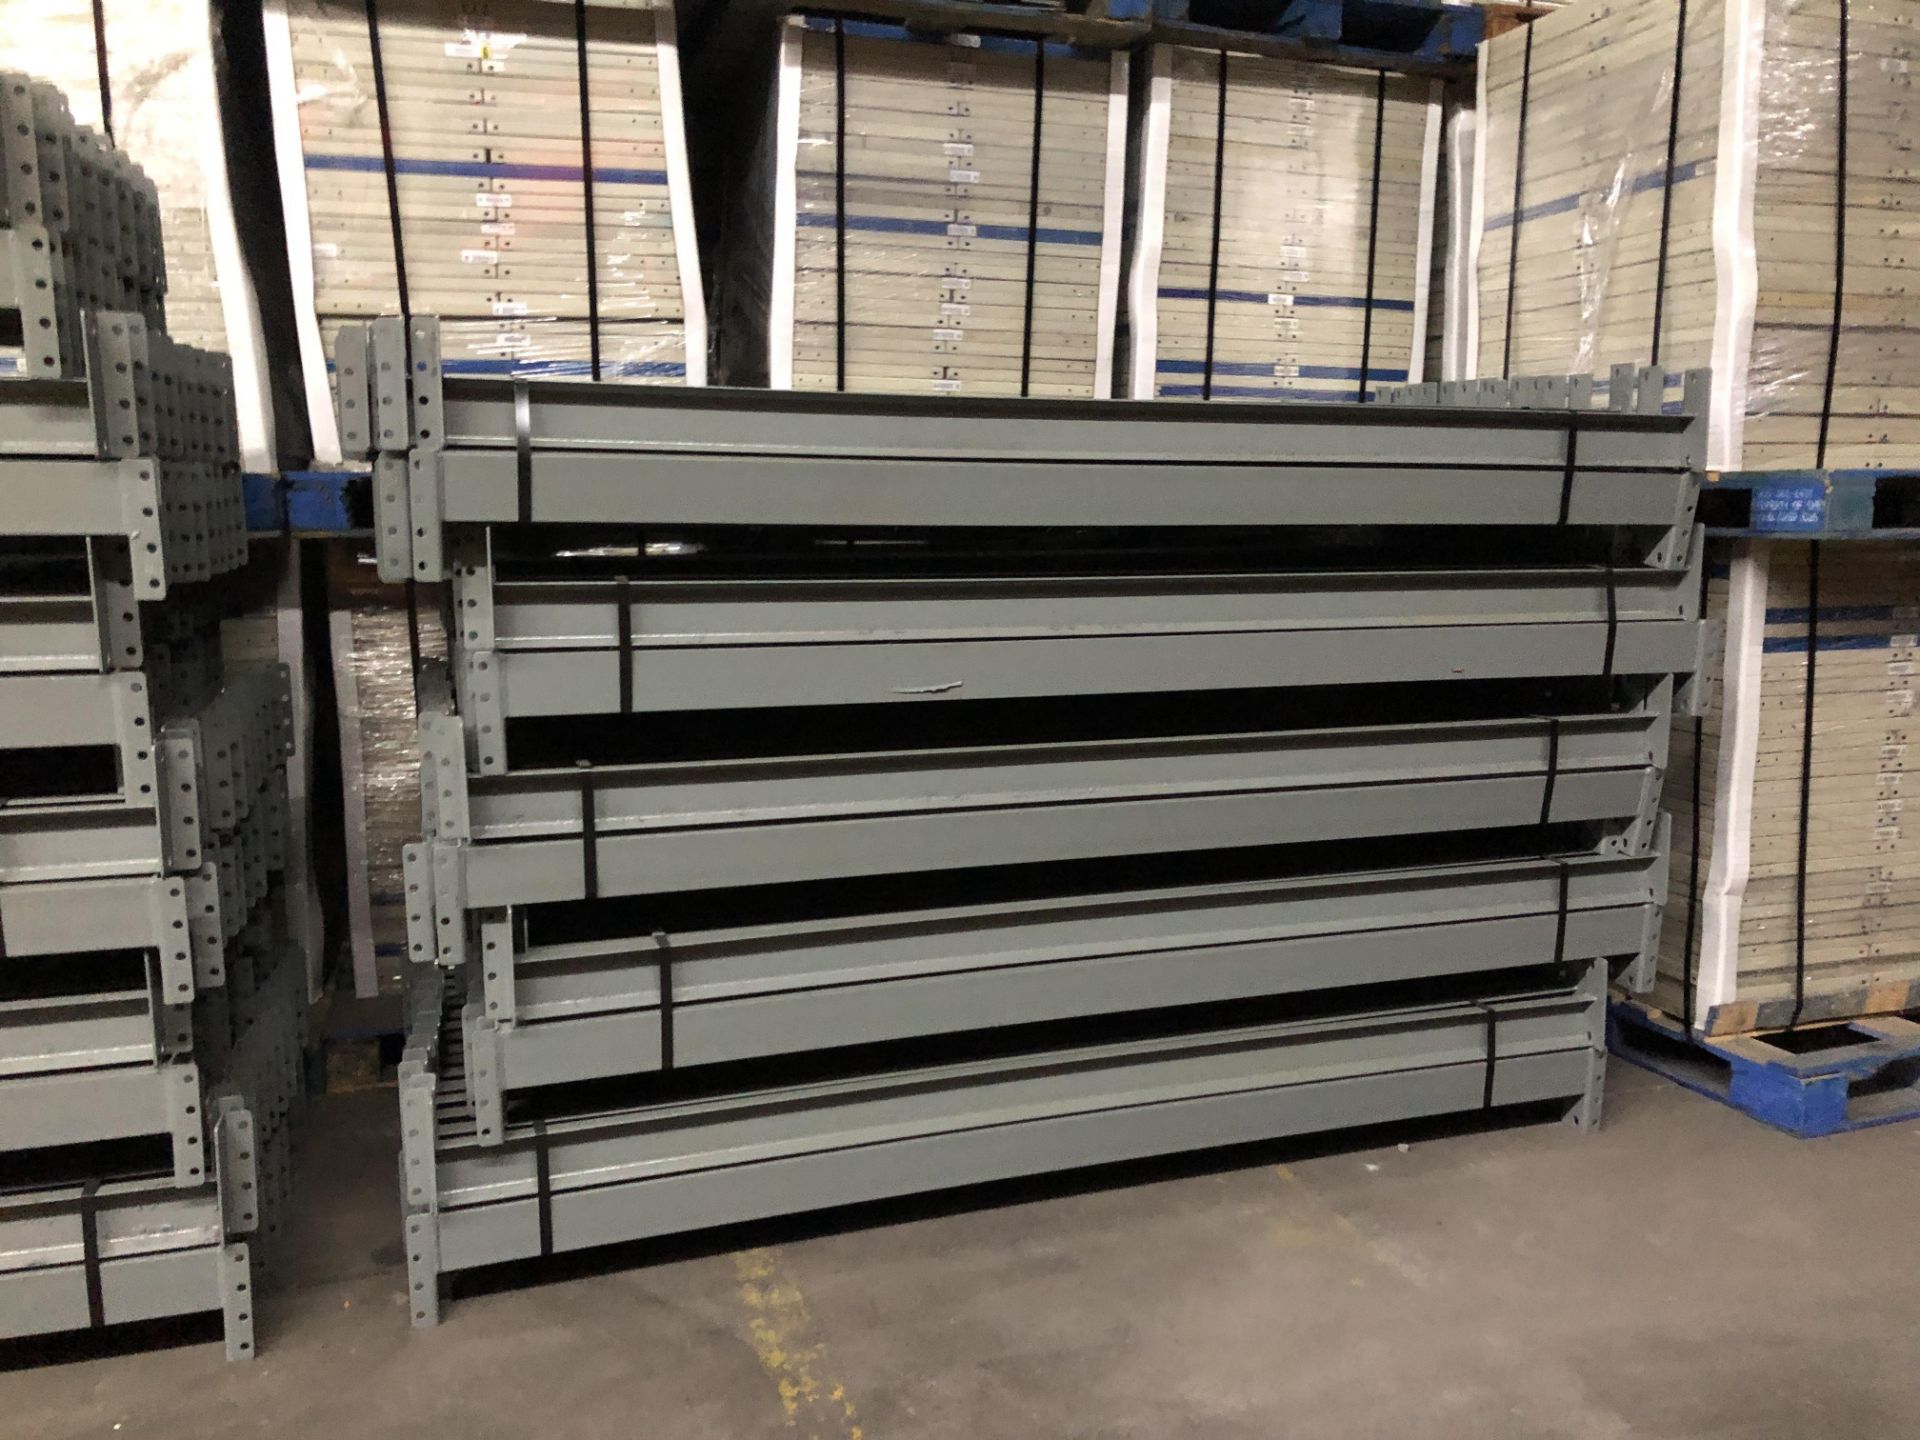 9 BAYS OF 10.5'H X 42"D X 93"L STRUCTURAL STYLE PALLET RACKS - Image 4 of 6